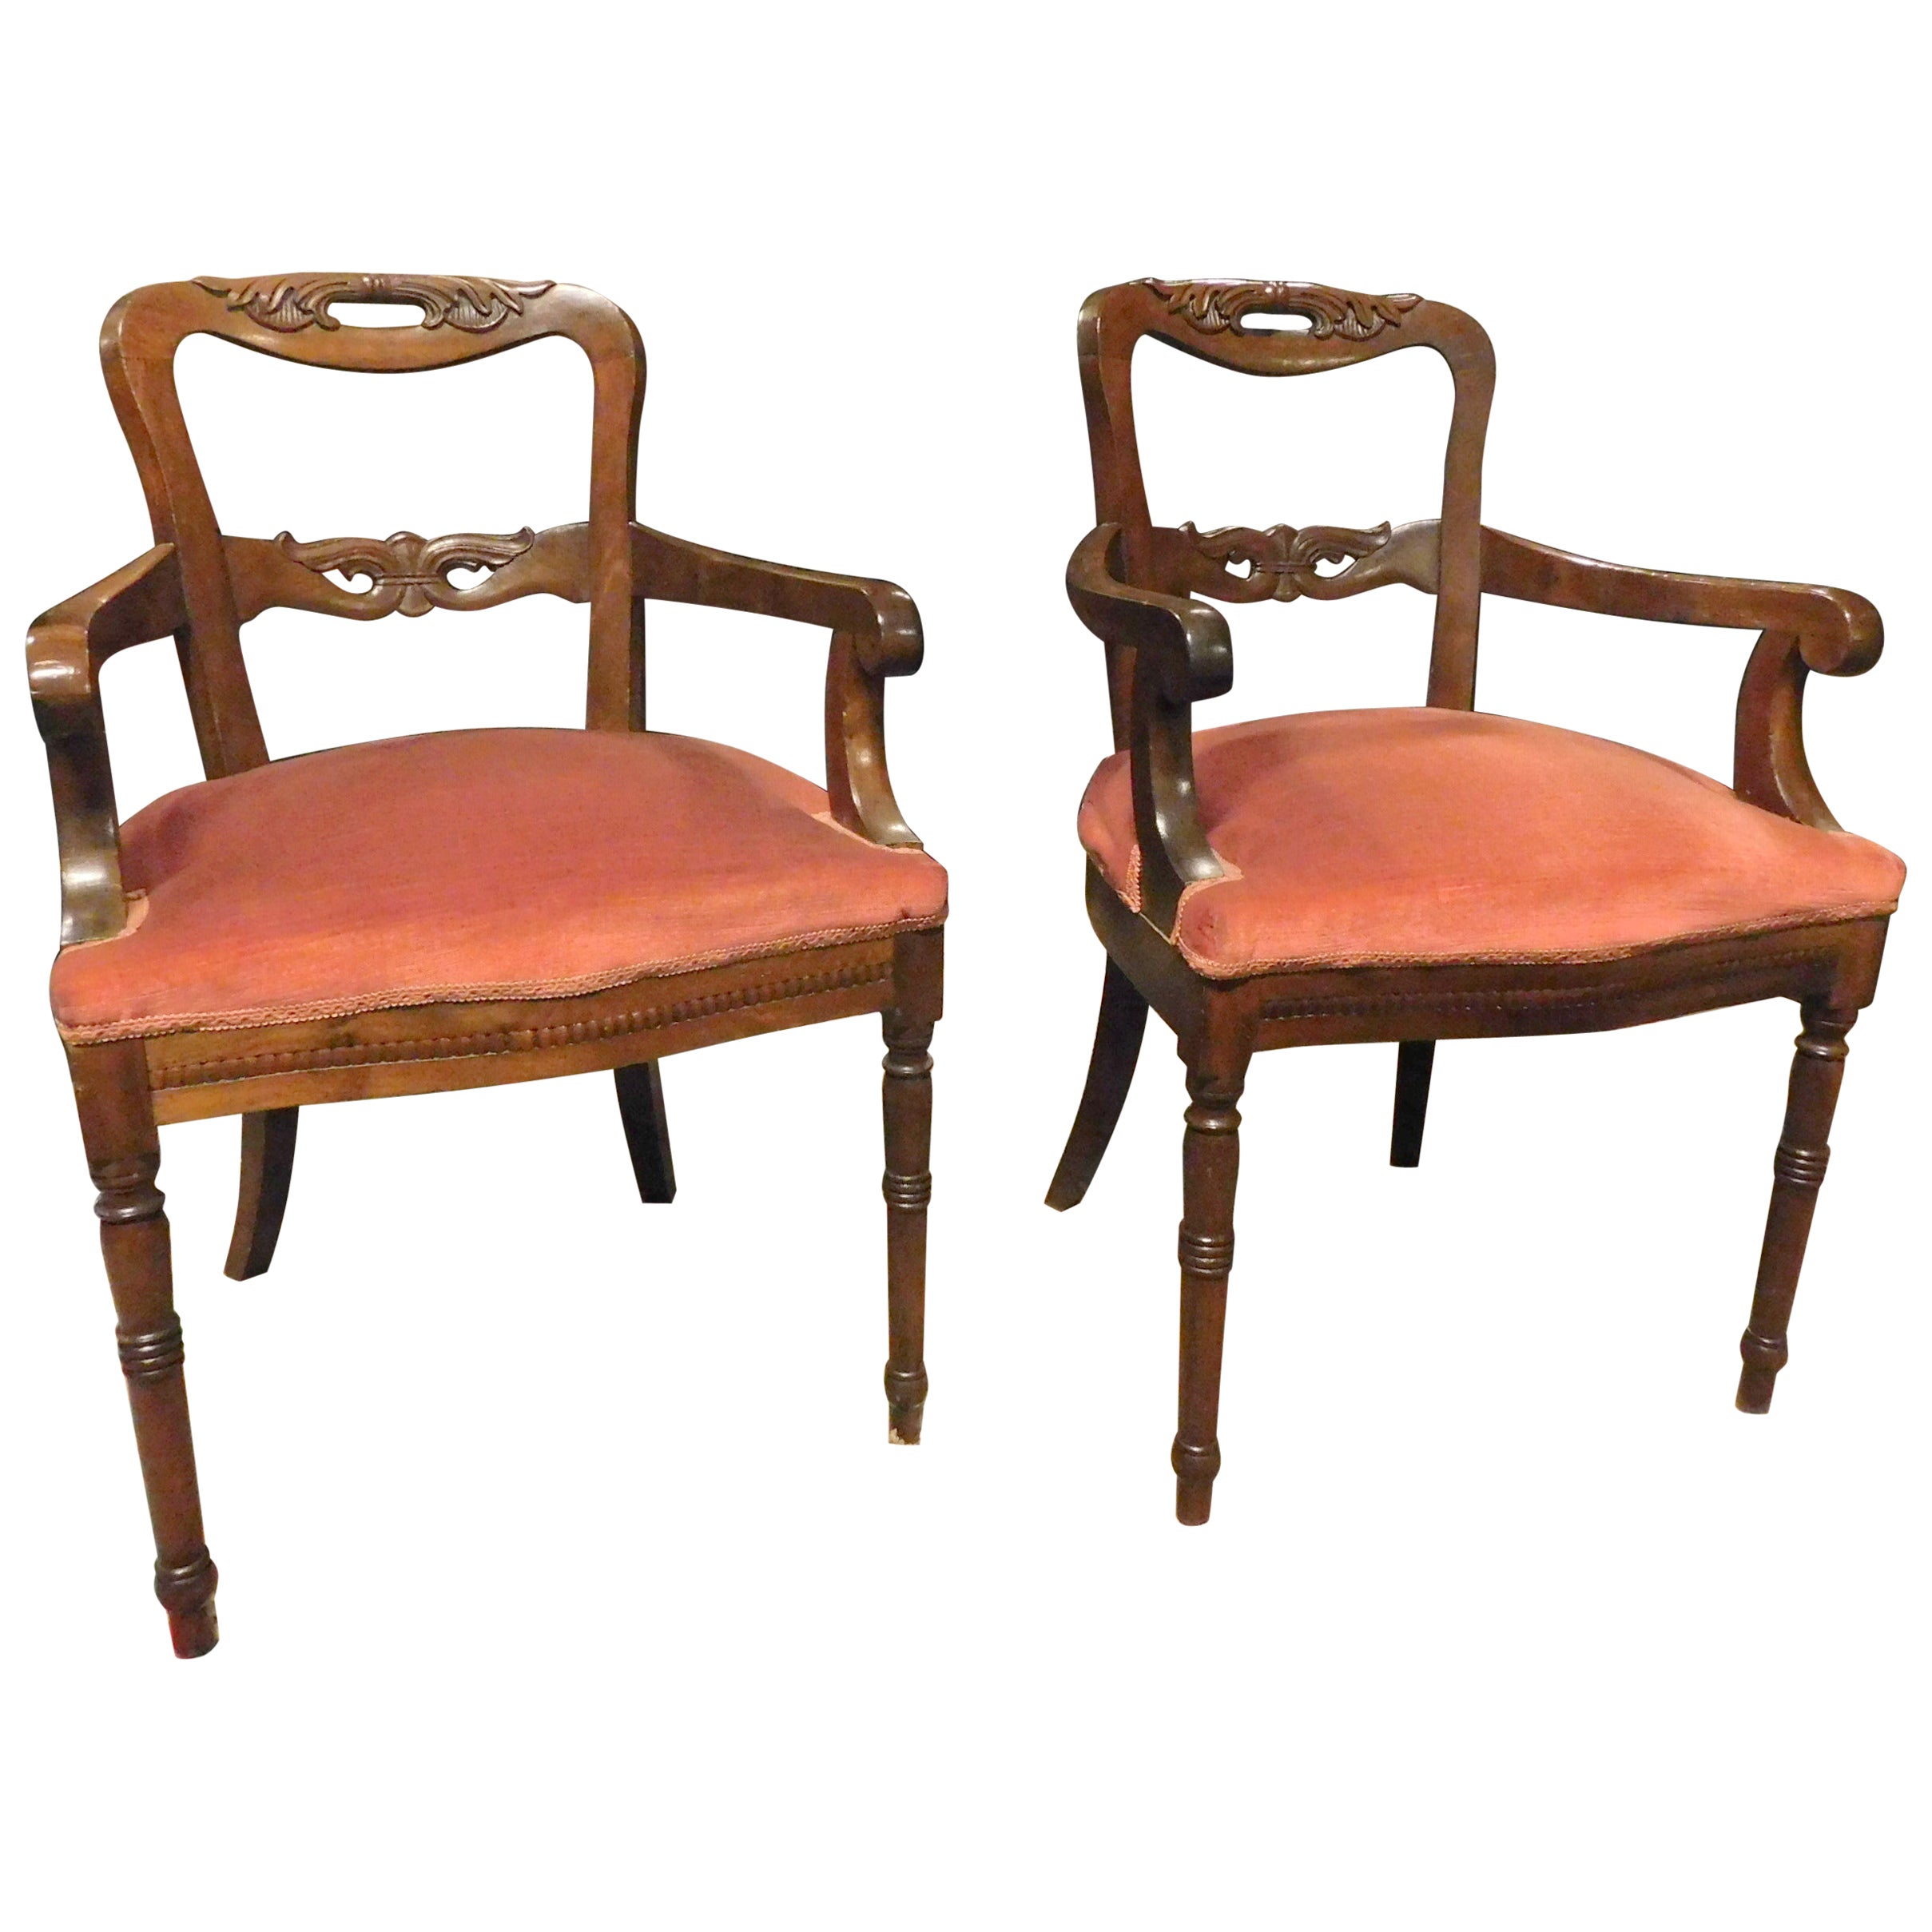 Pair of Armchairs, Seats in Walnut and Red Velvet, 19th Century Italy